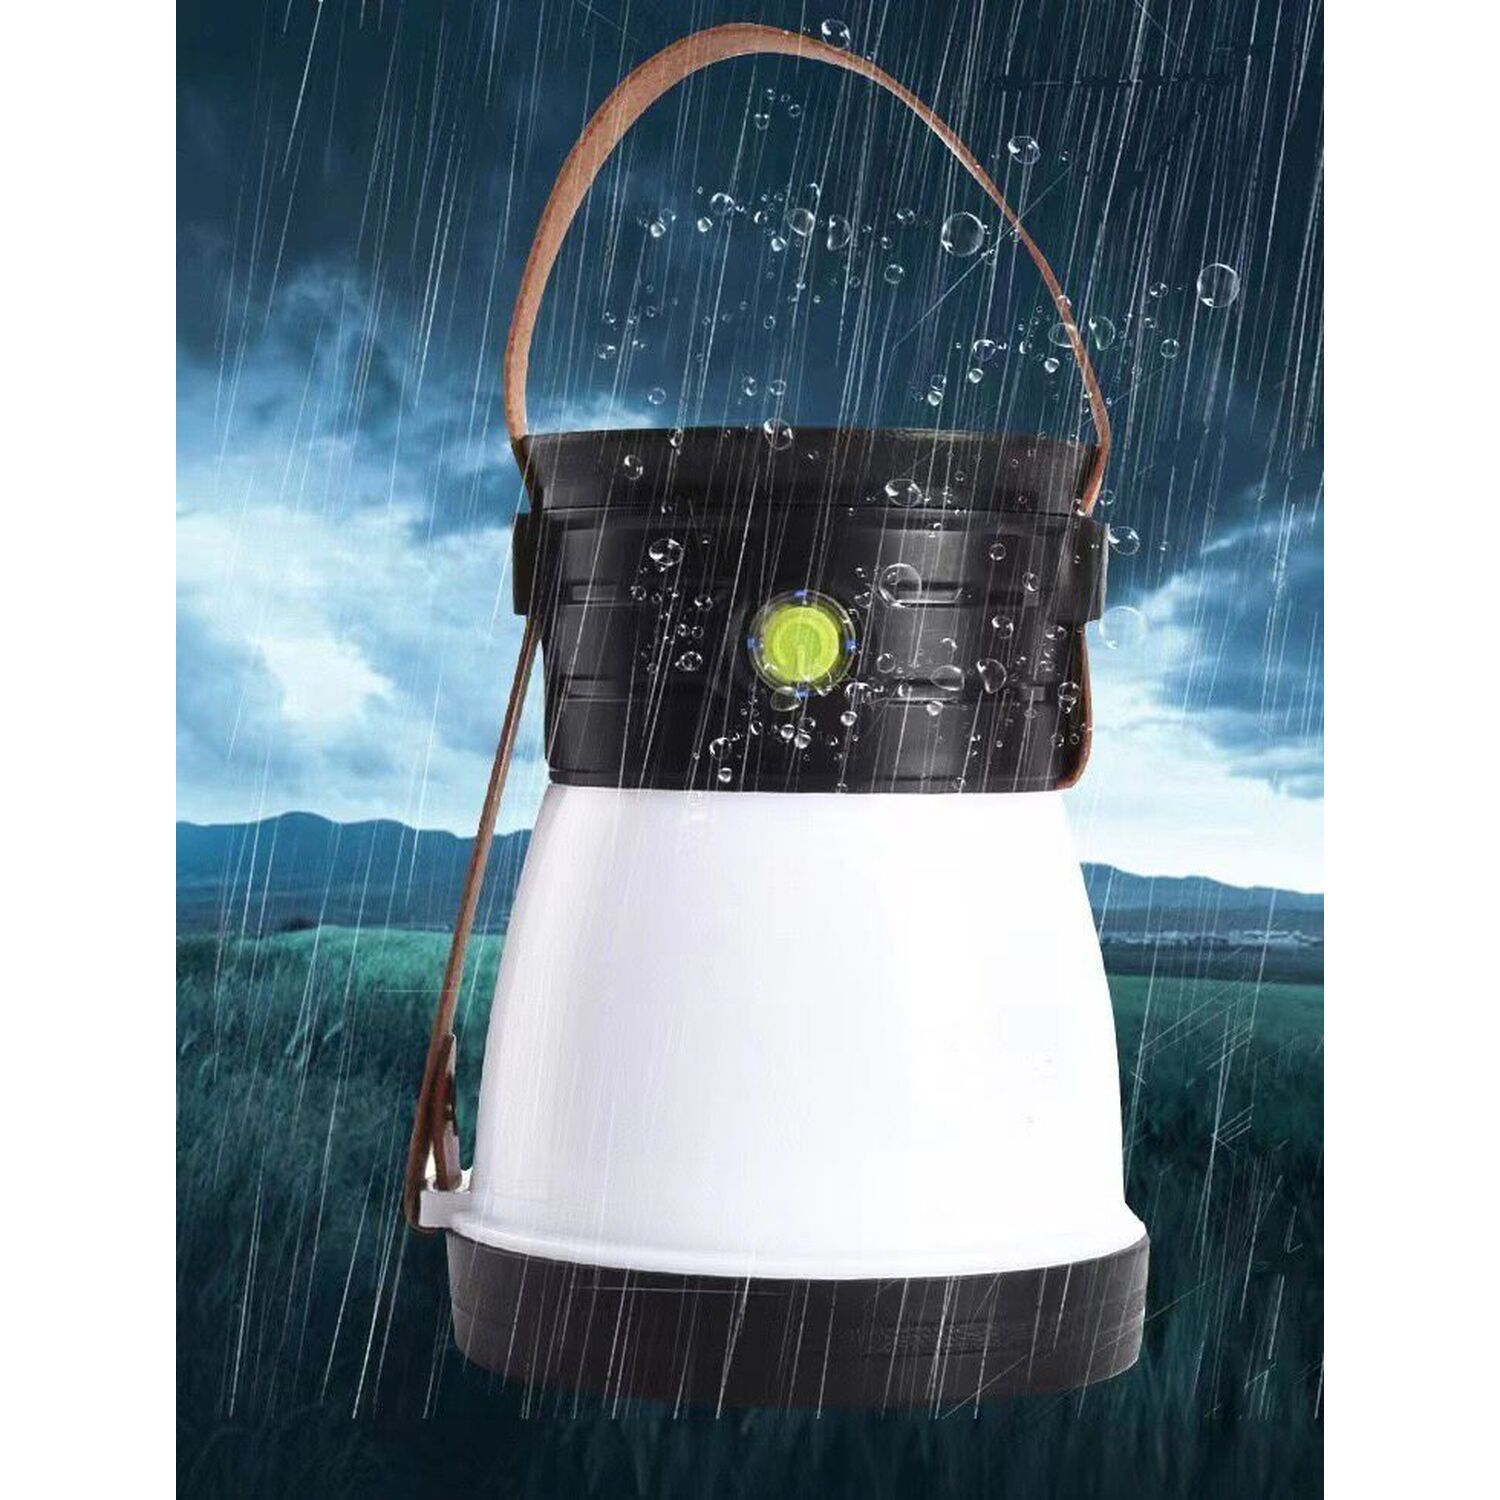 Rechargeable Camping Lantern with Strap - Black Image 3